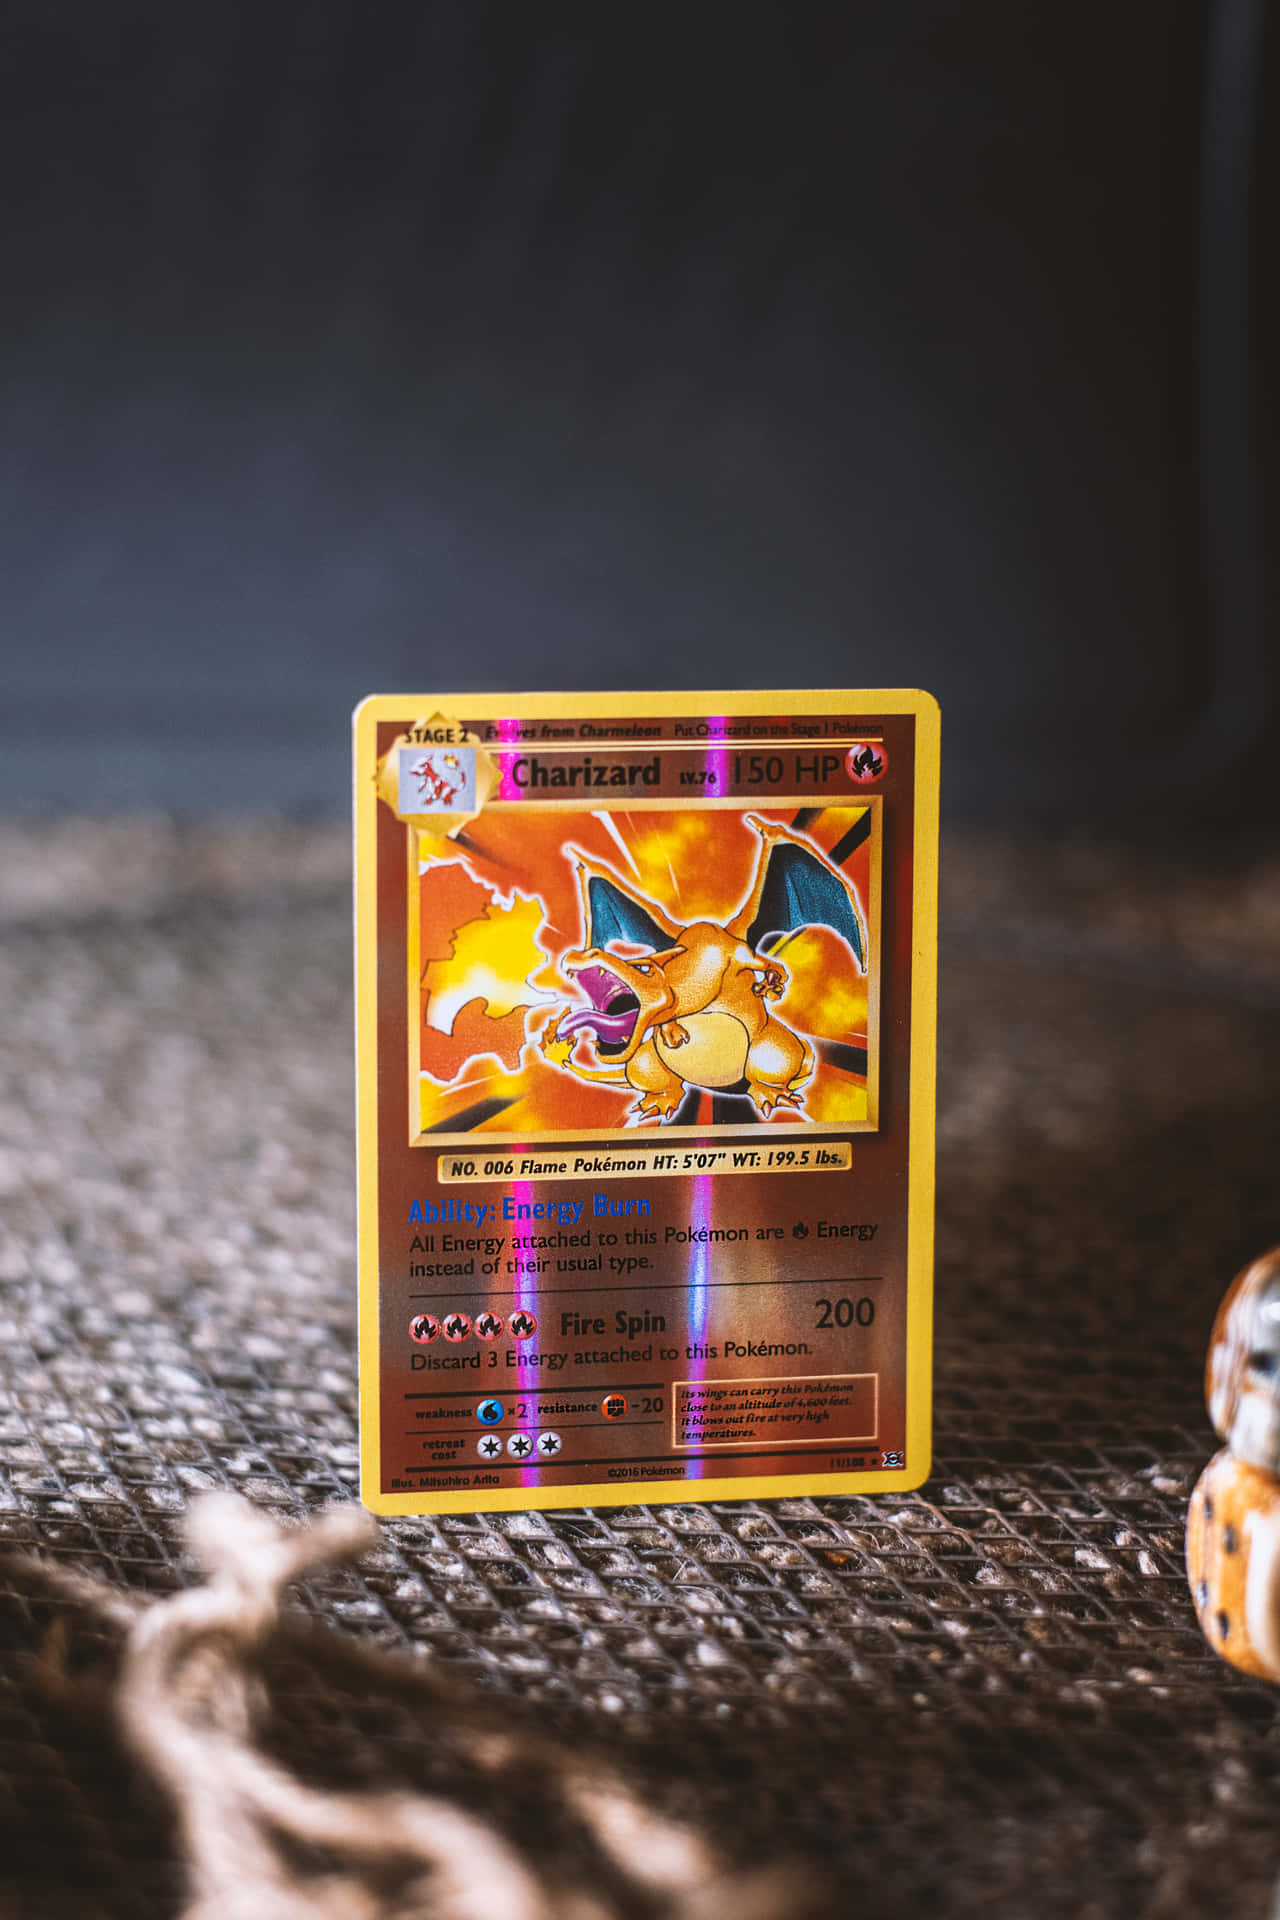 Pokemon Card On A Table With A Toy